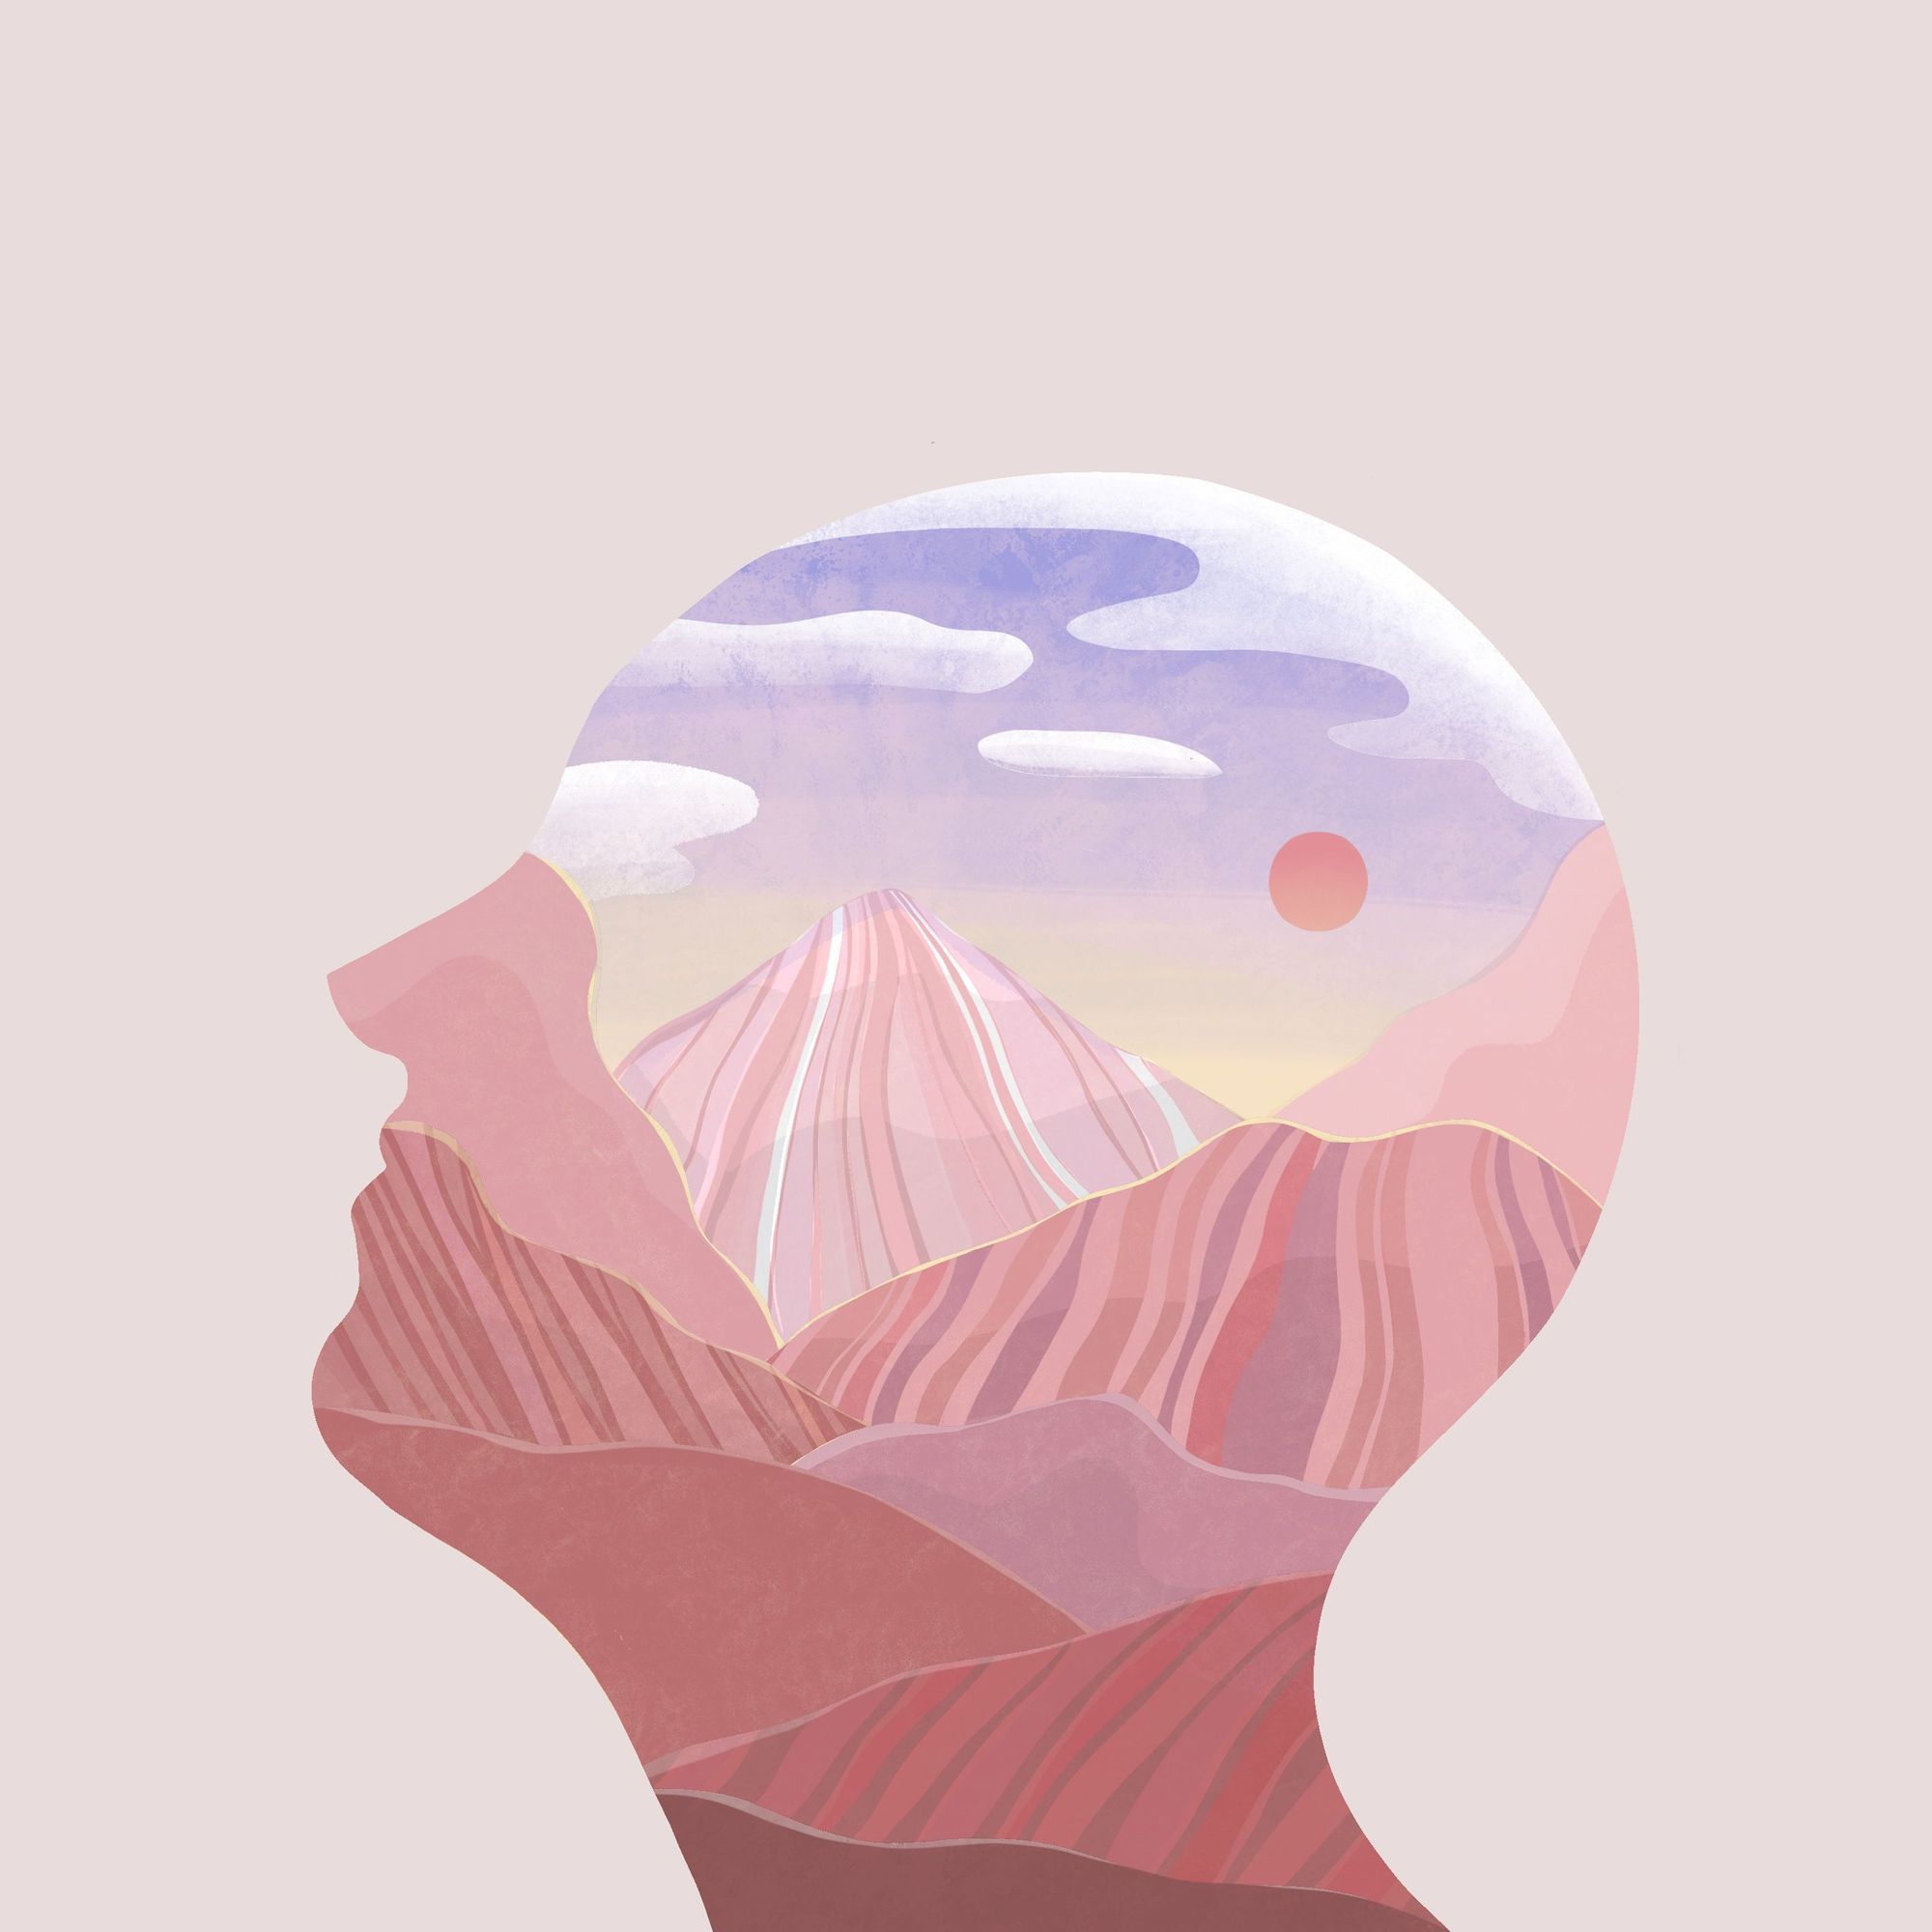 Illustration of a head, filled with pictures of mountains and desert.